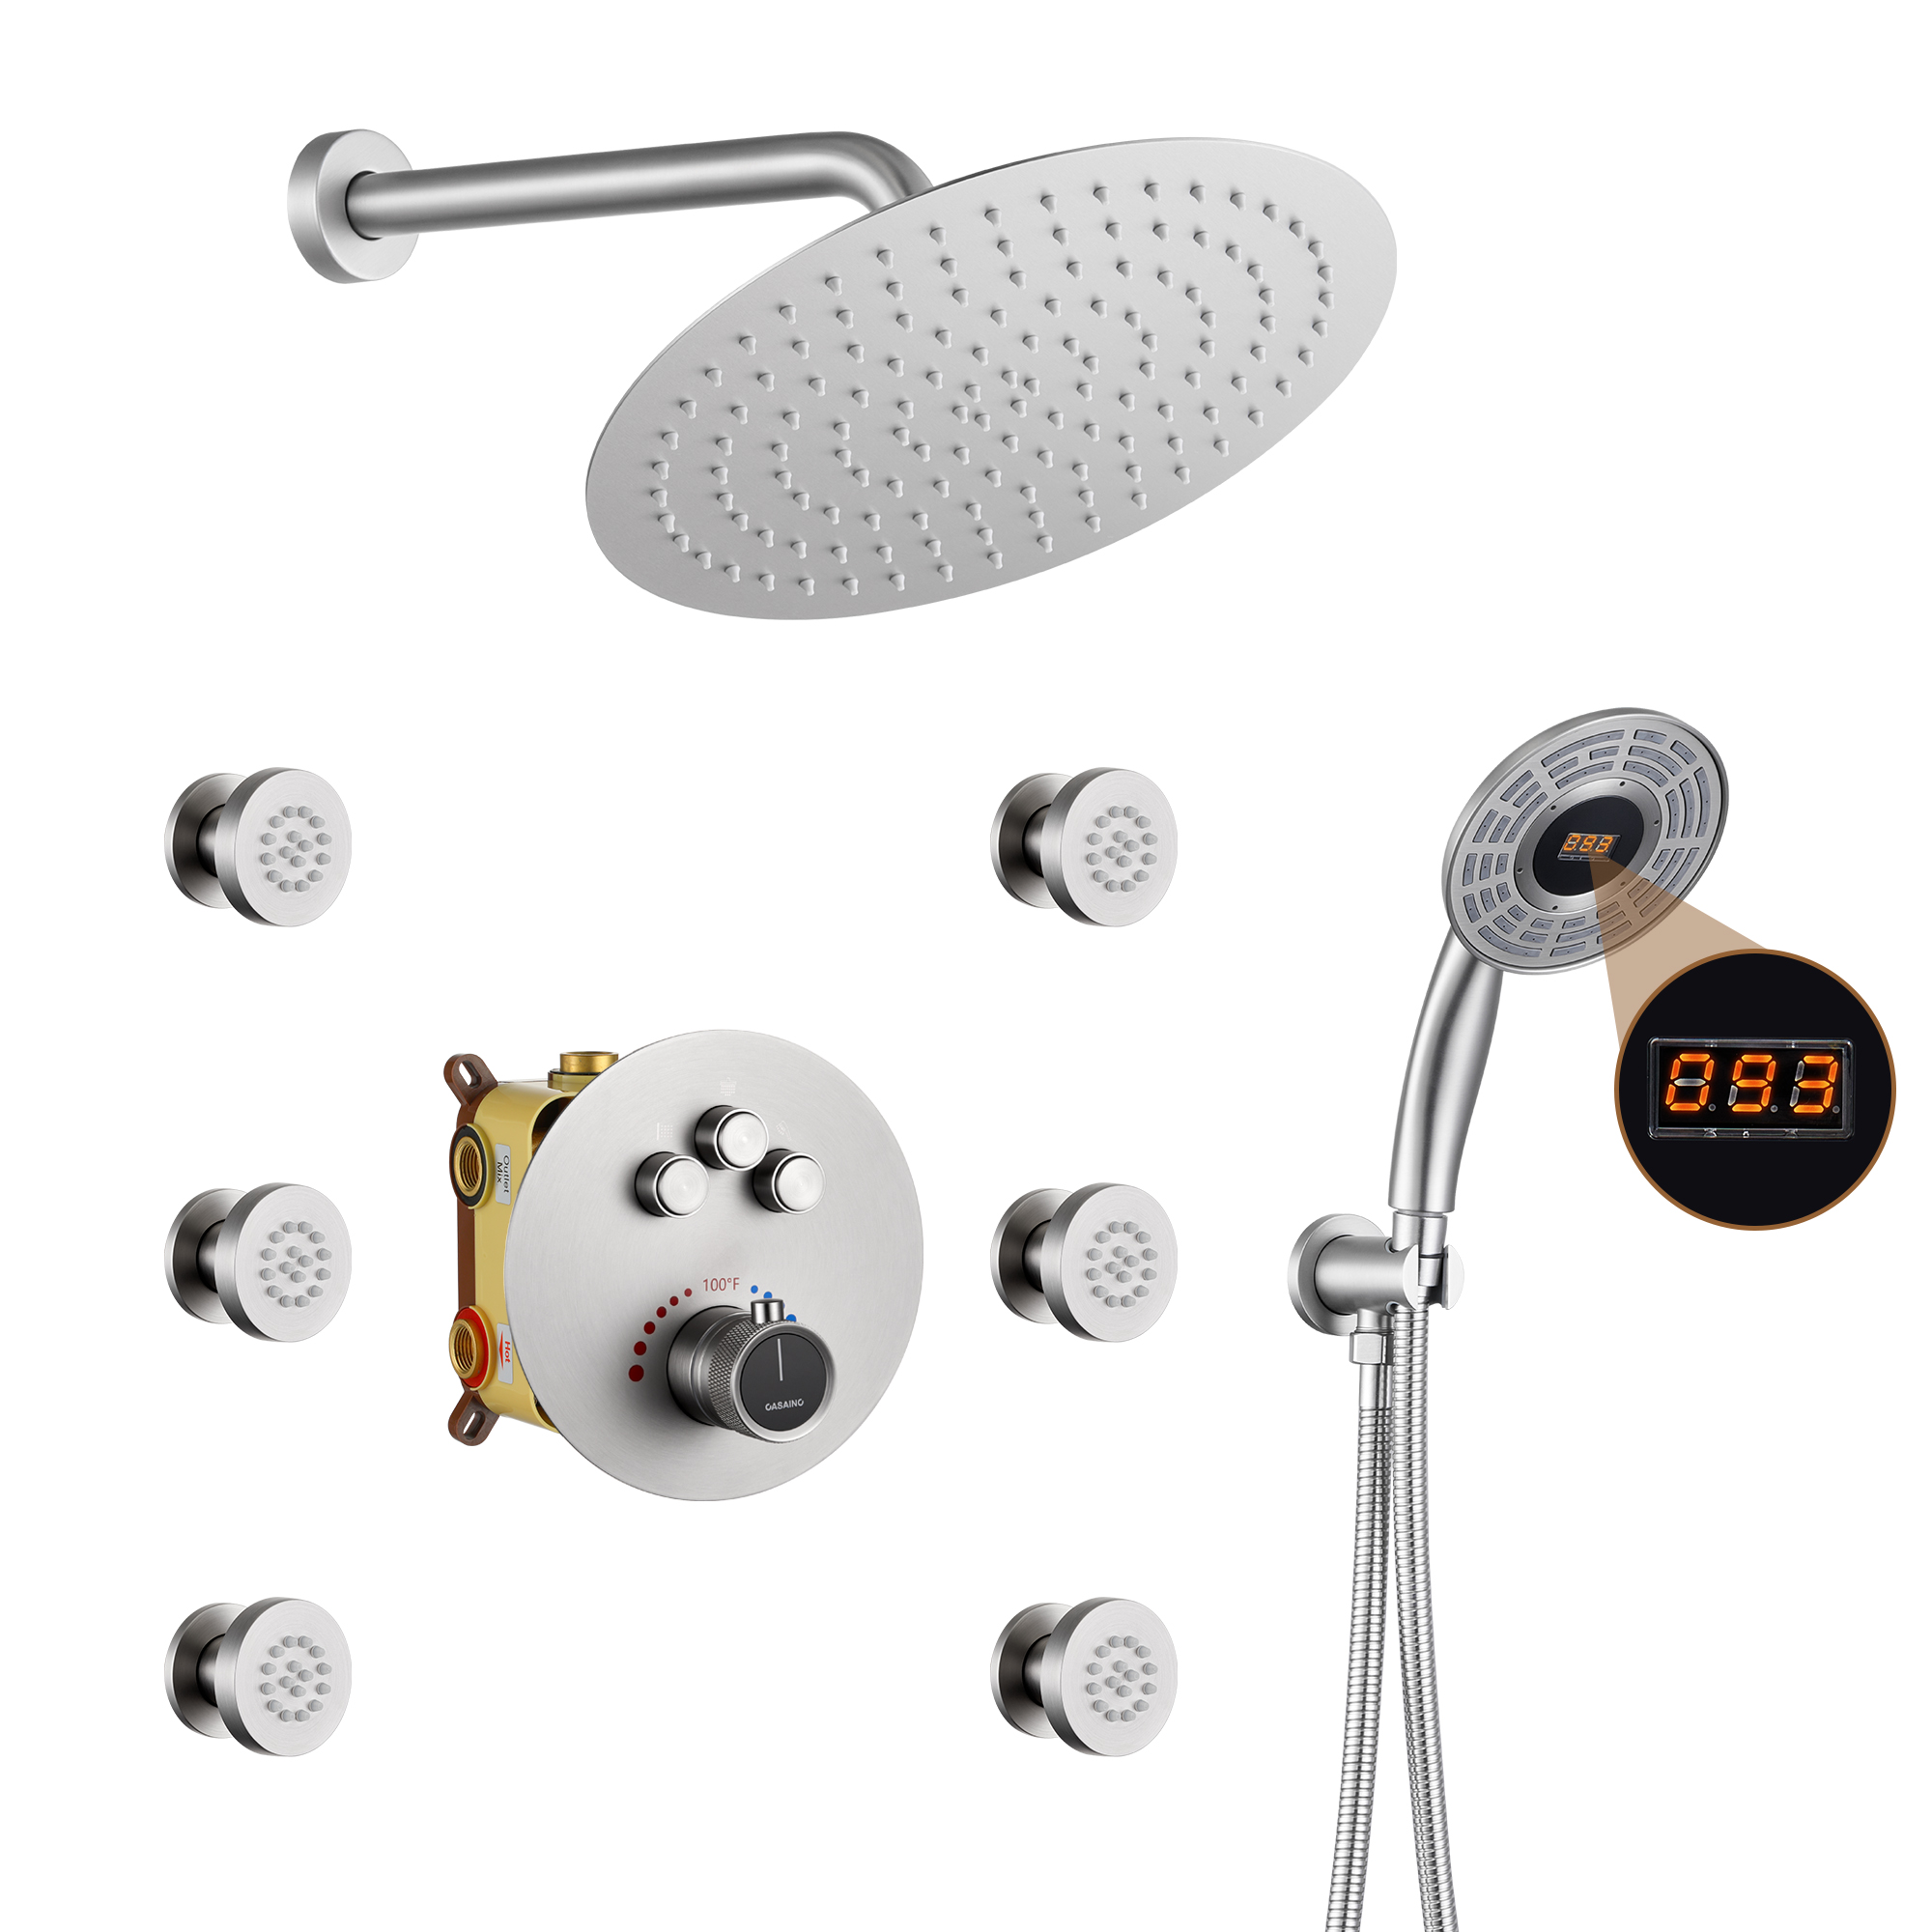 Smart Temperature Digital Adjustment Luxury Thermostatic Shower with Body Sprays, Valve Included Best Luxury Shower Systems for Modern Bathroom